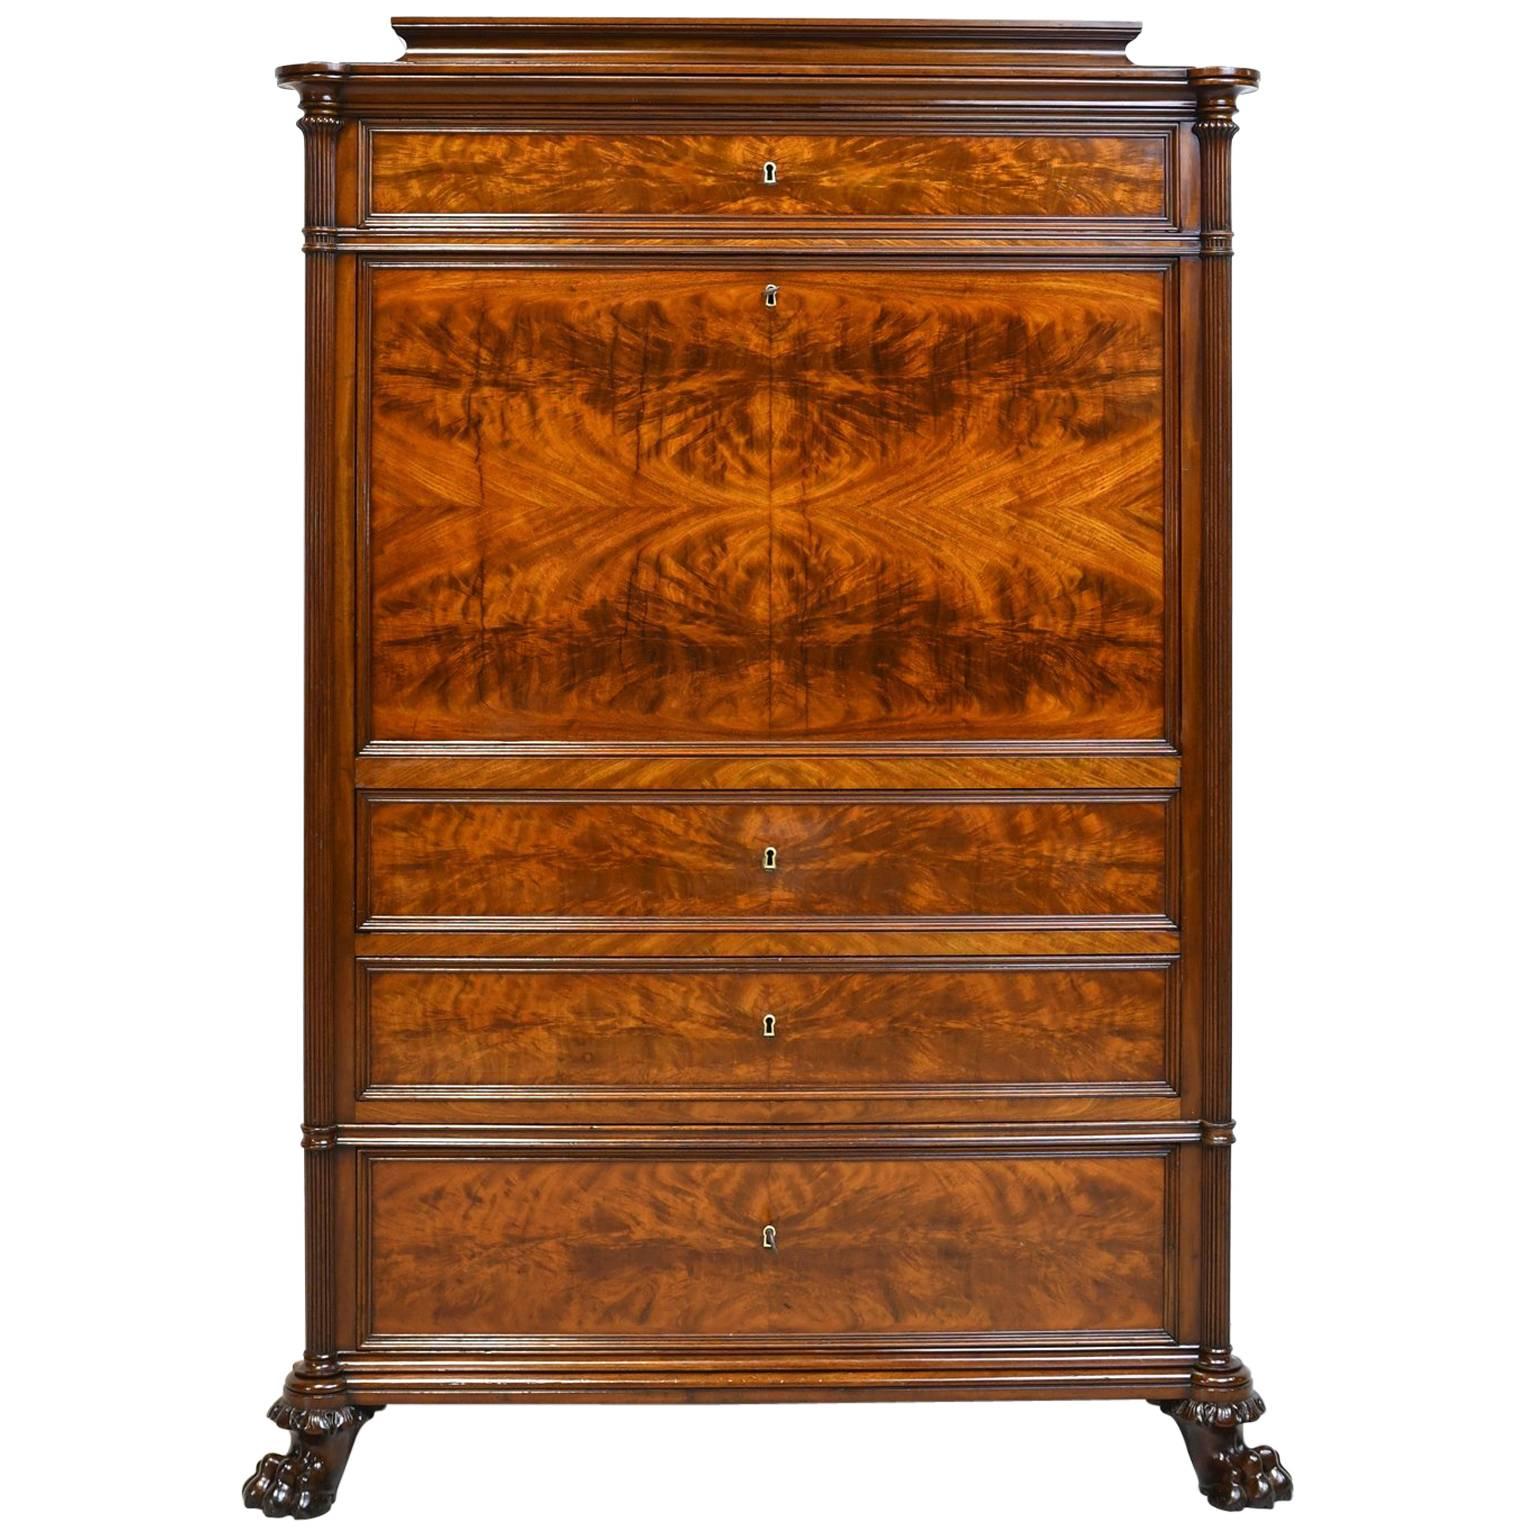 An extremely handsome secretary in fine West Indies mahogany with pedestal top above top drawer, and a birch inlaid drop-front opening to a desk with a long open storage area for papers below a series of fitted drawers that are in mahogany banded in